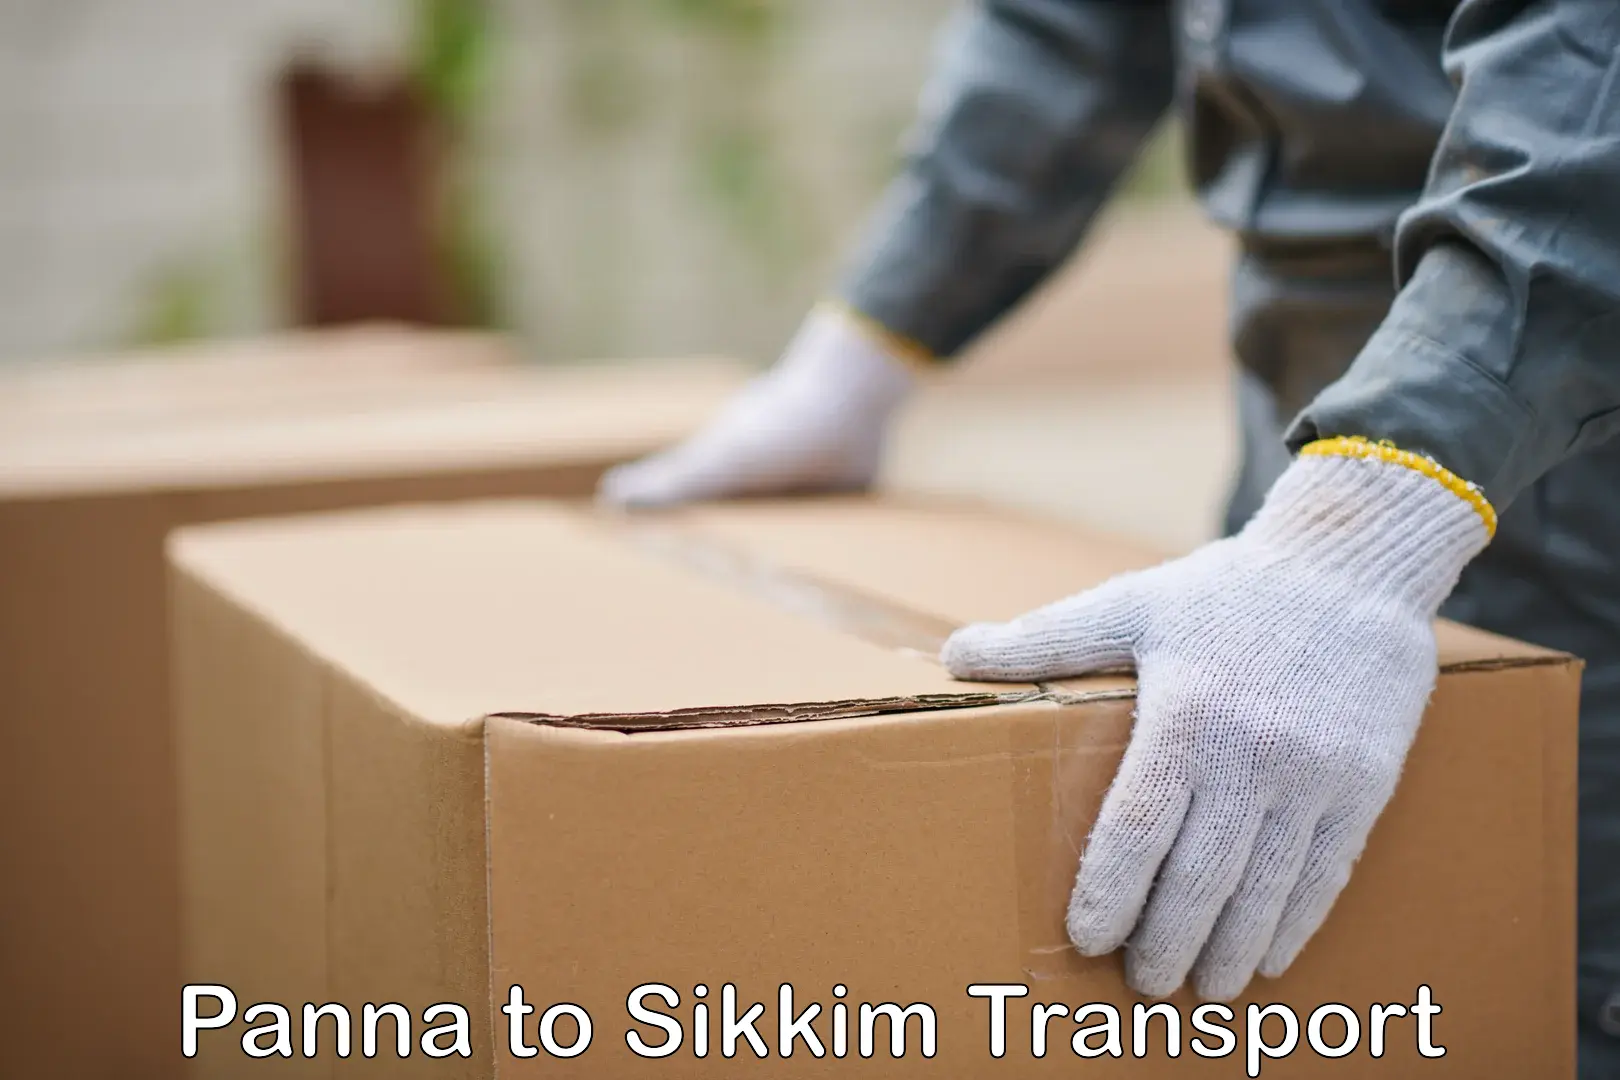 Online transport service Panna to East Sikkim